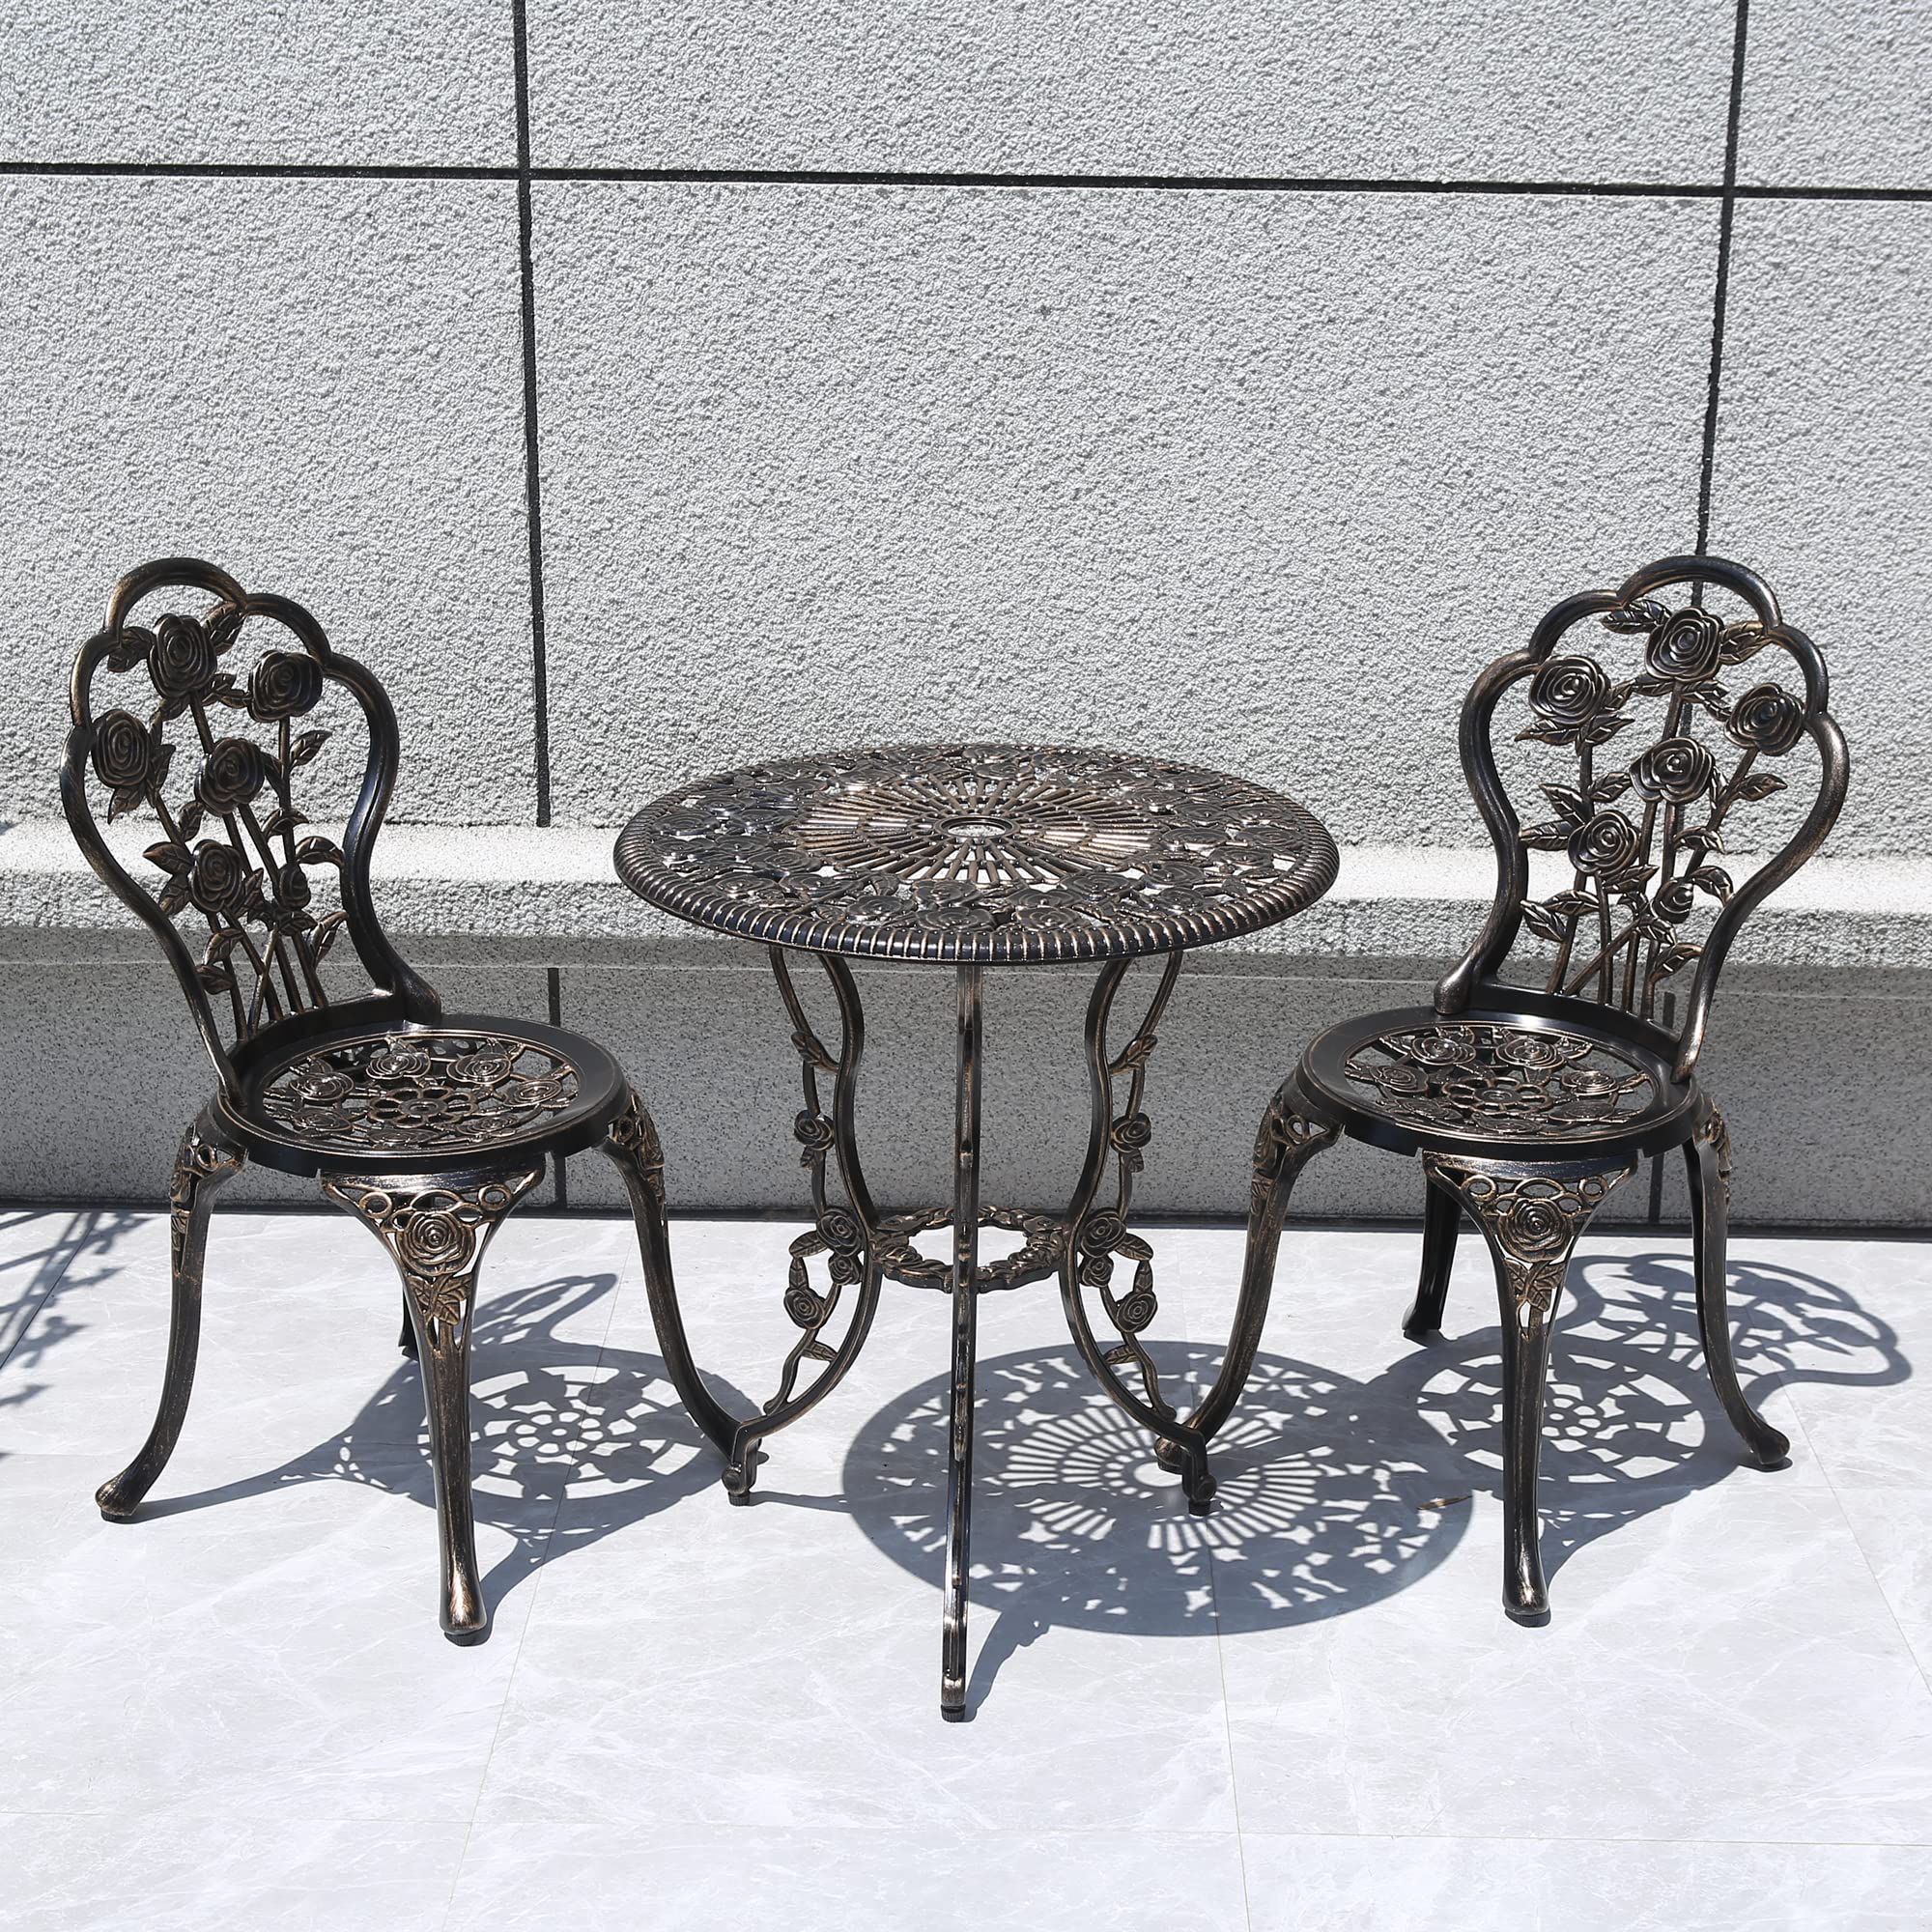 KAI LI Outdoor Furniture Bistro Set with Rose Pattern 1 Table 2 Chairs for Garden Patio Porch (Rose-Bronzed)